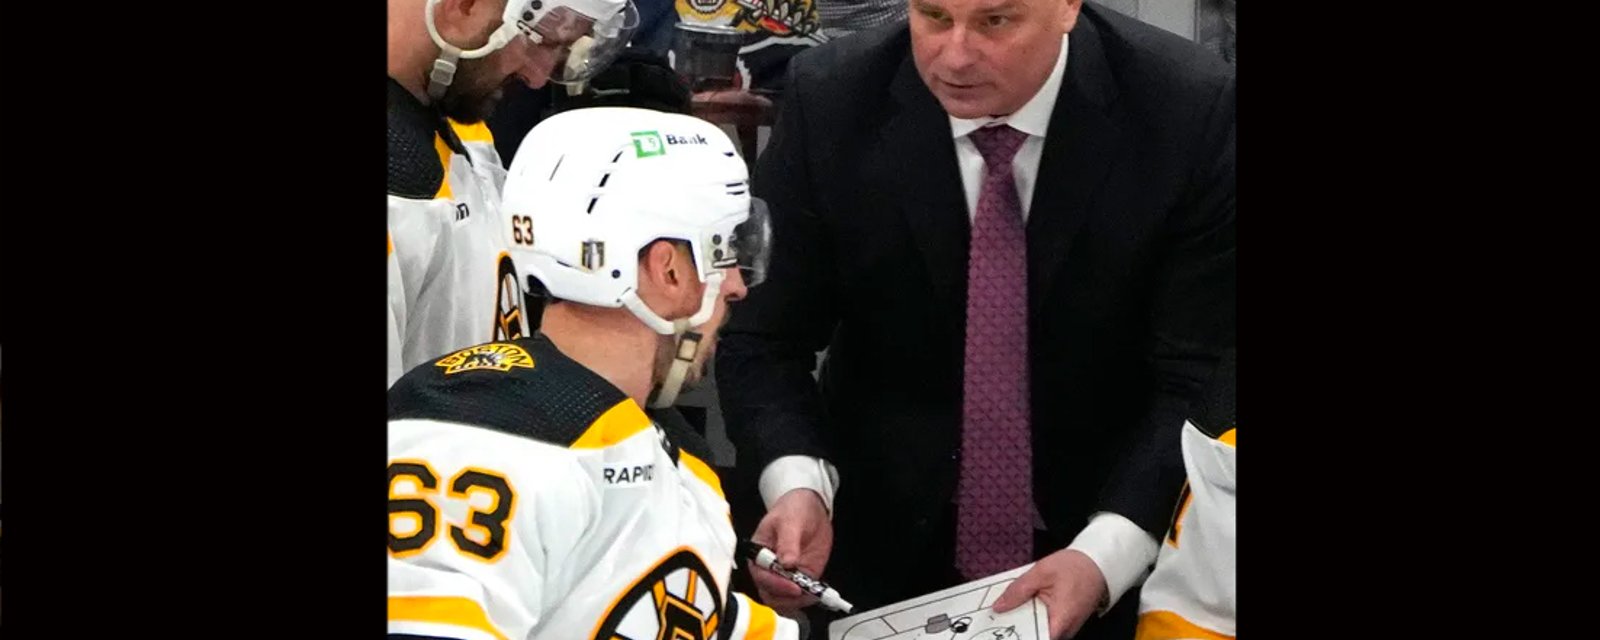 Conflict reported between Brad Marchand and coach Jim Montgomery